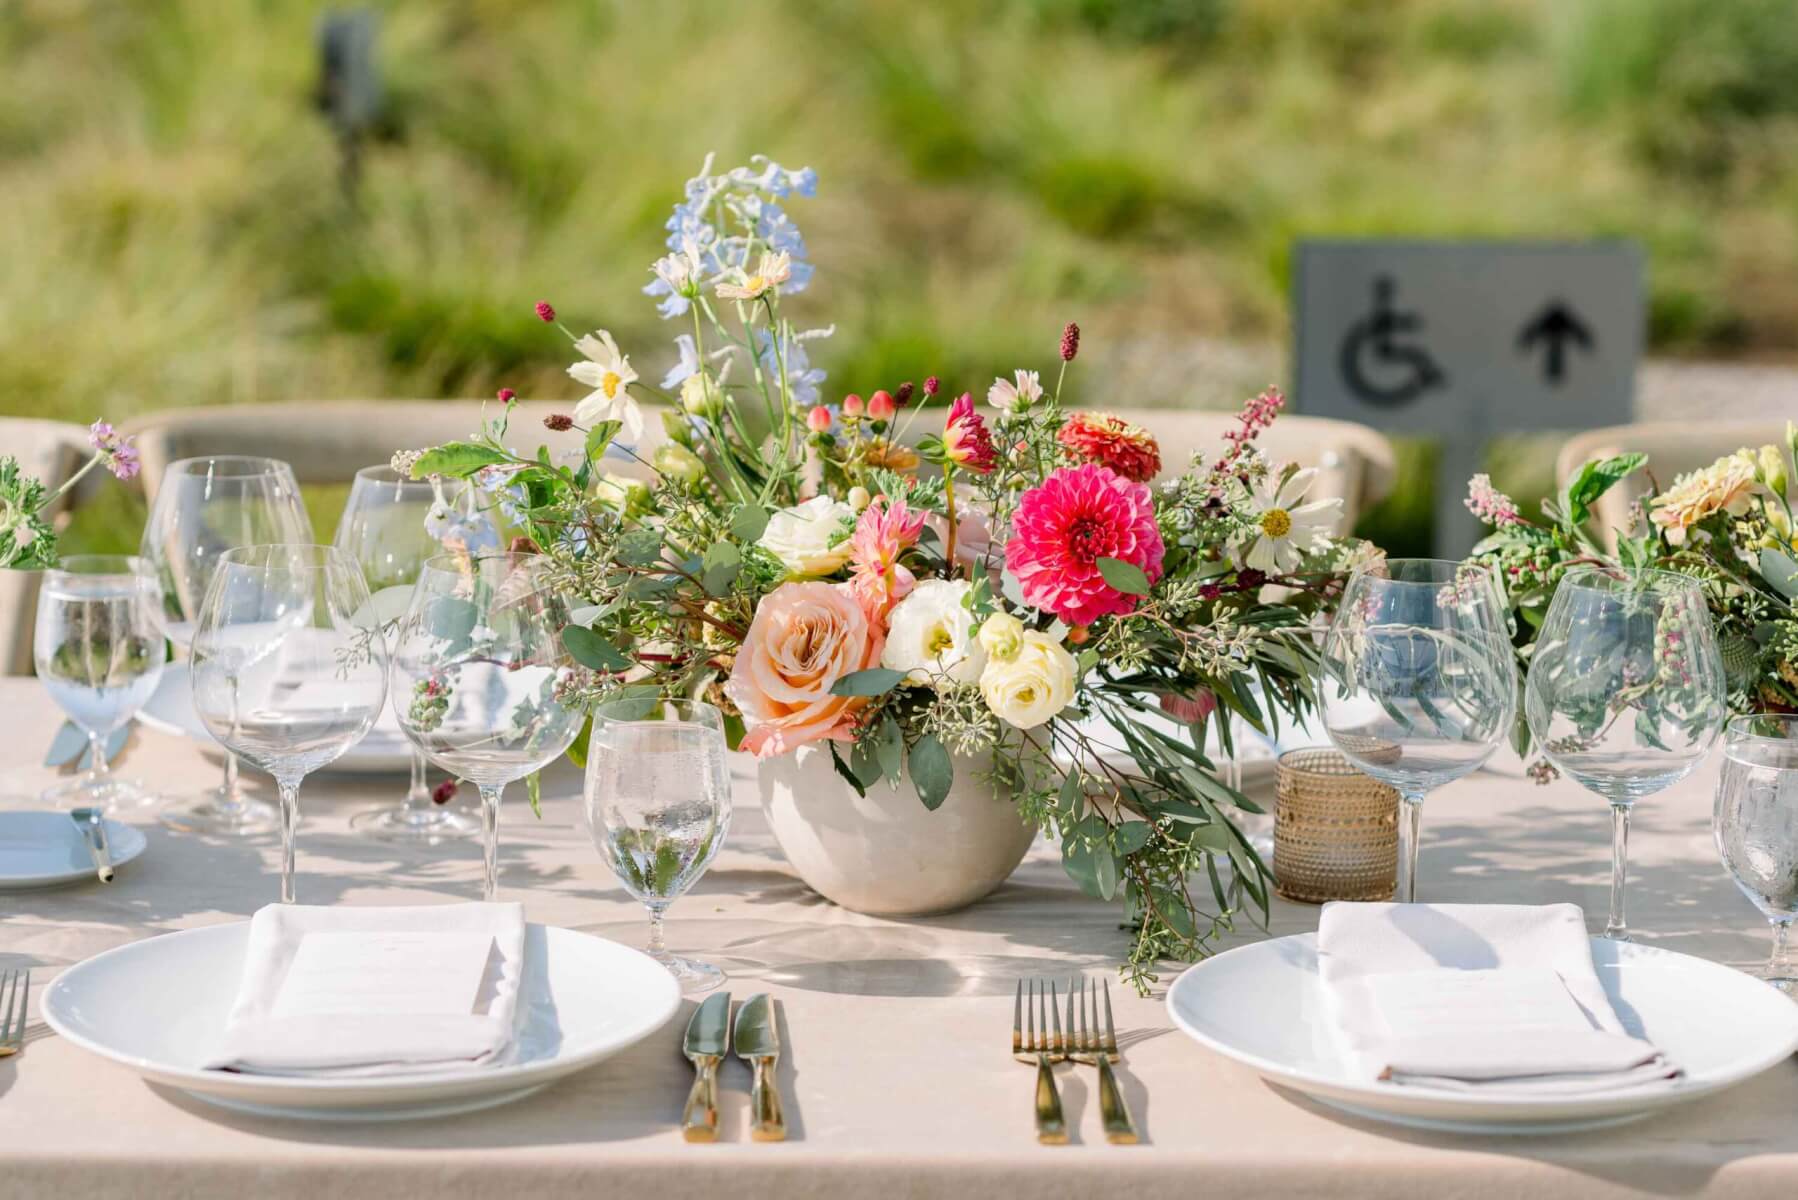 An outdoor wedding table set with a brightly-colored flowers in a rounded stone vase.